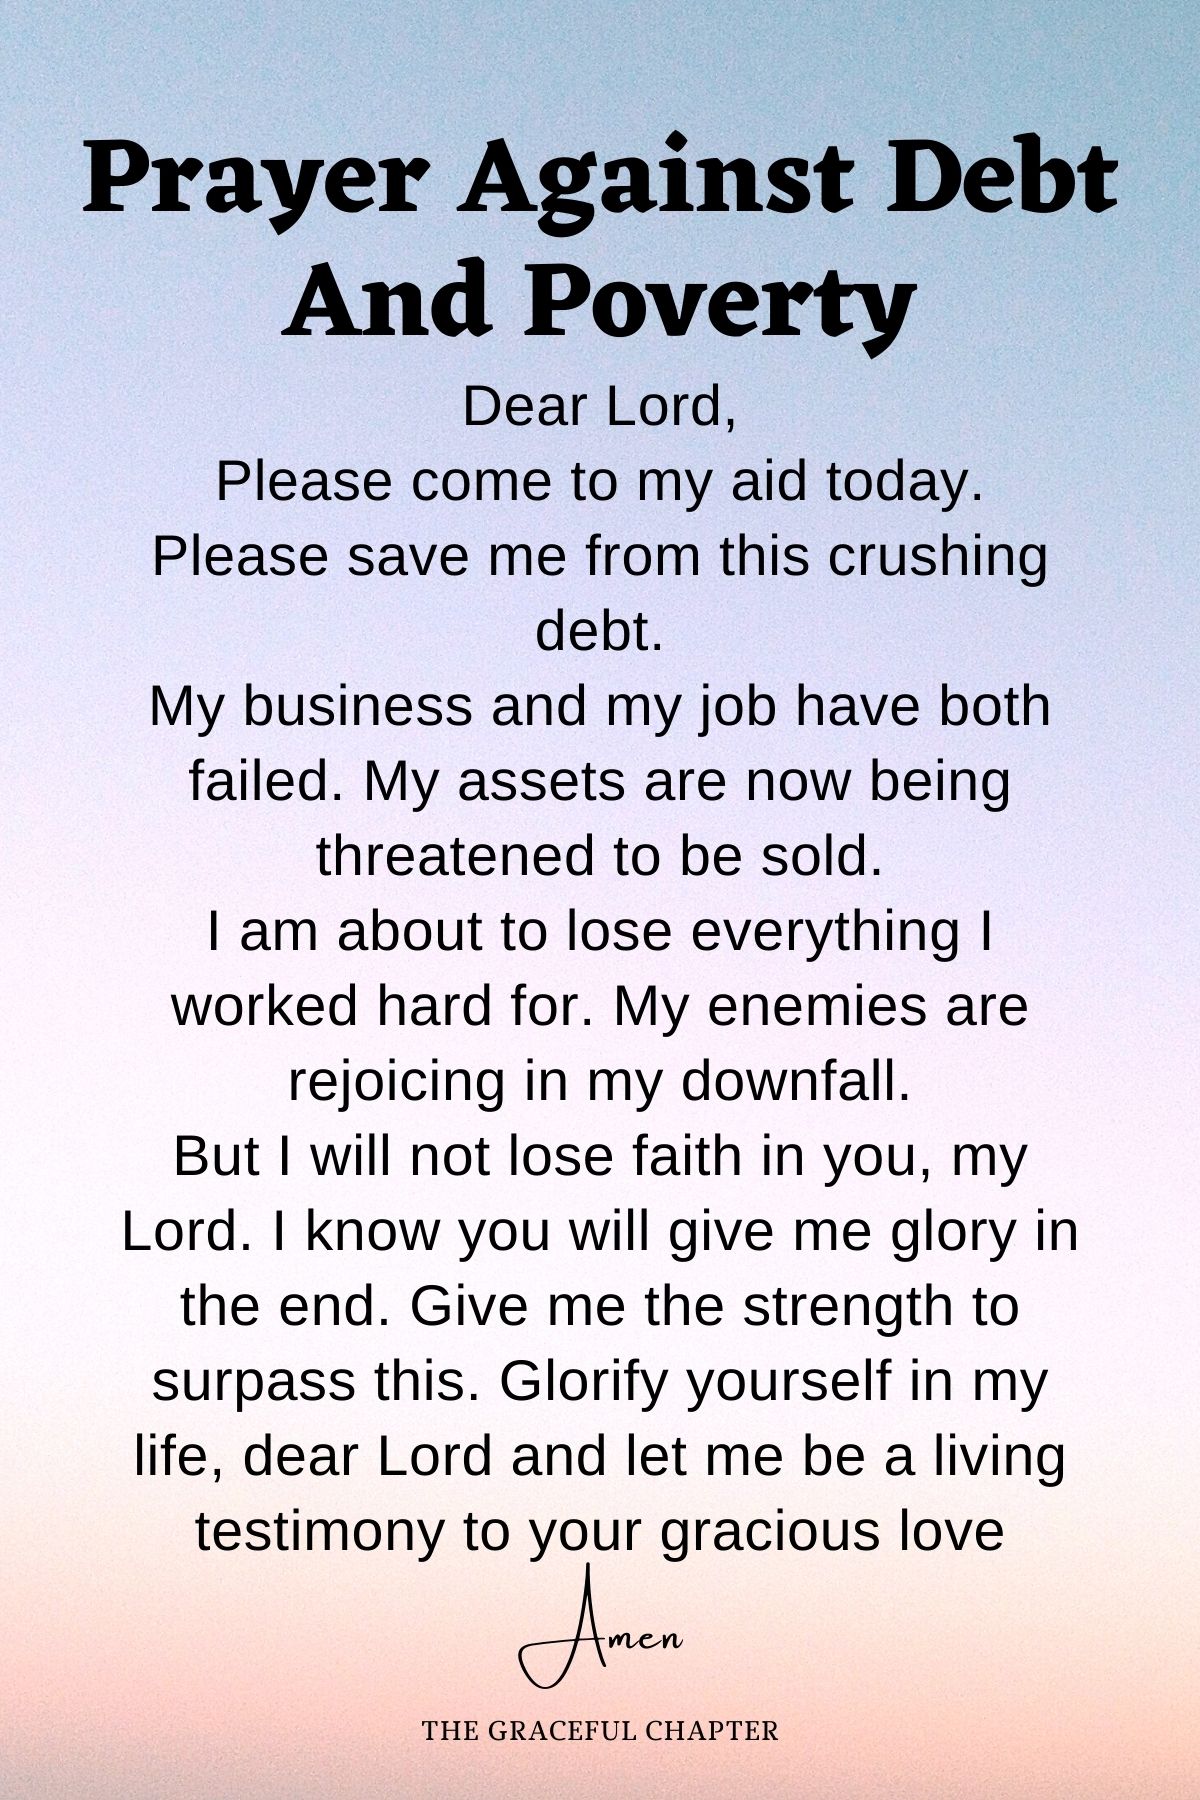 Prayer against debt and poverty - prayers for difficult situations